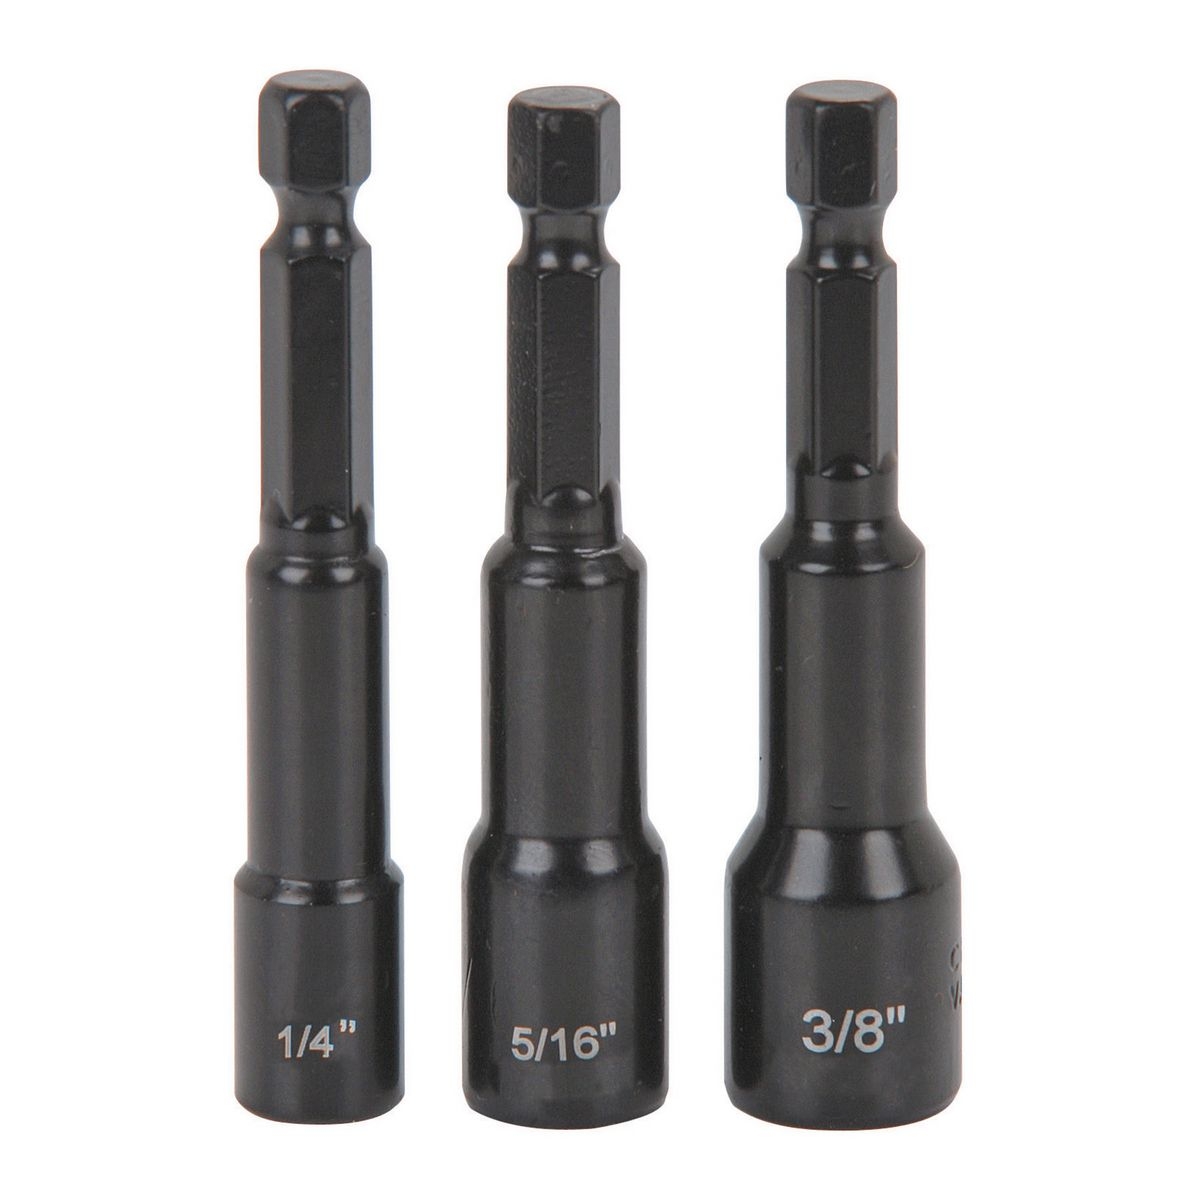 WARRIOR SAE Quick Release Magnetic Nutsetter Set 3 Pc. - Item 68477 / 04830 / 65803 / 90583